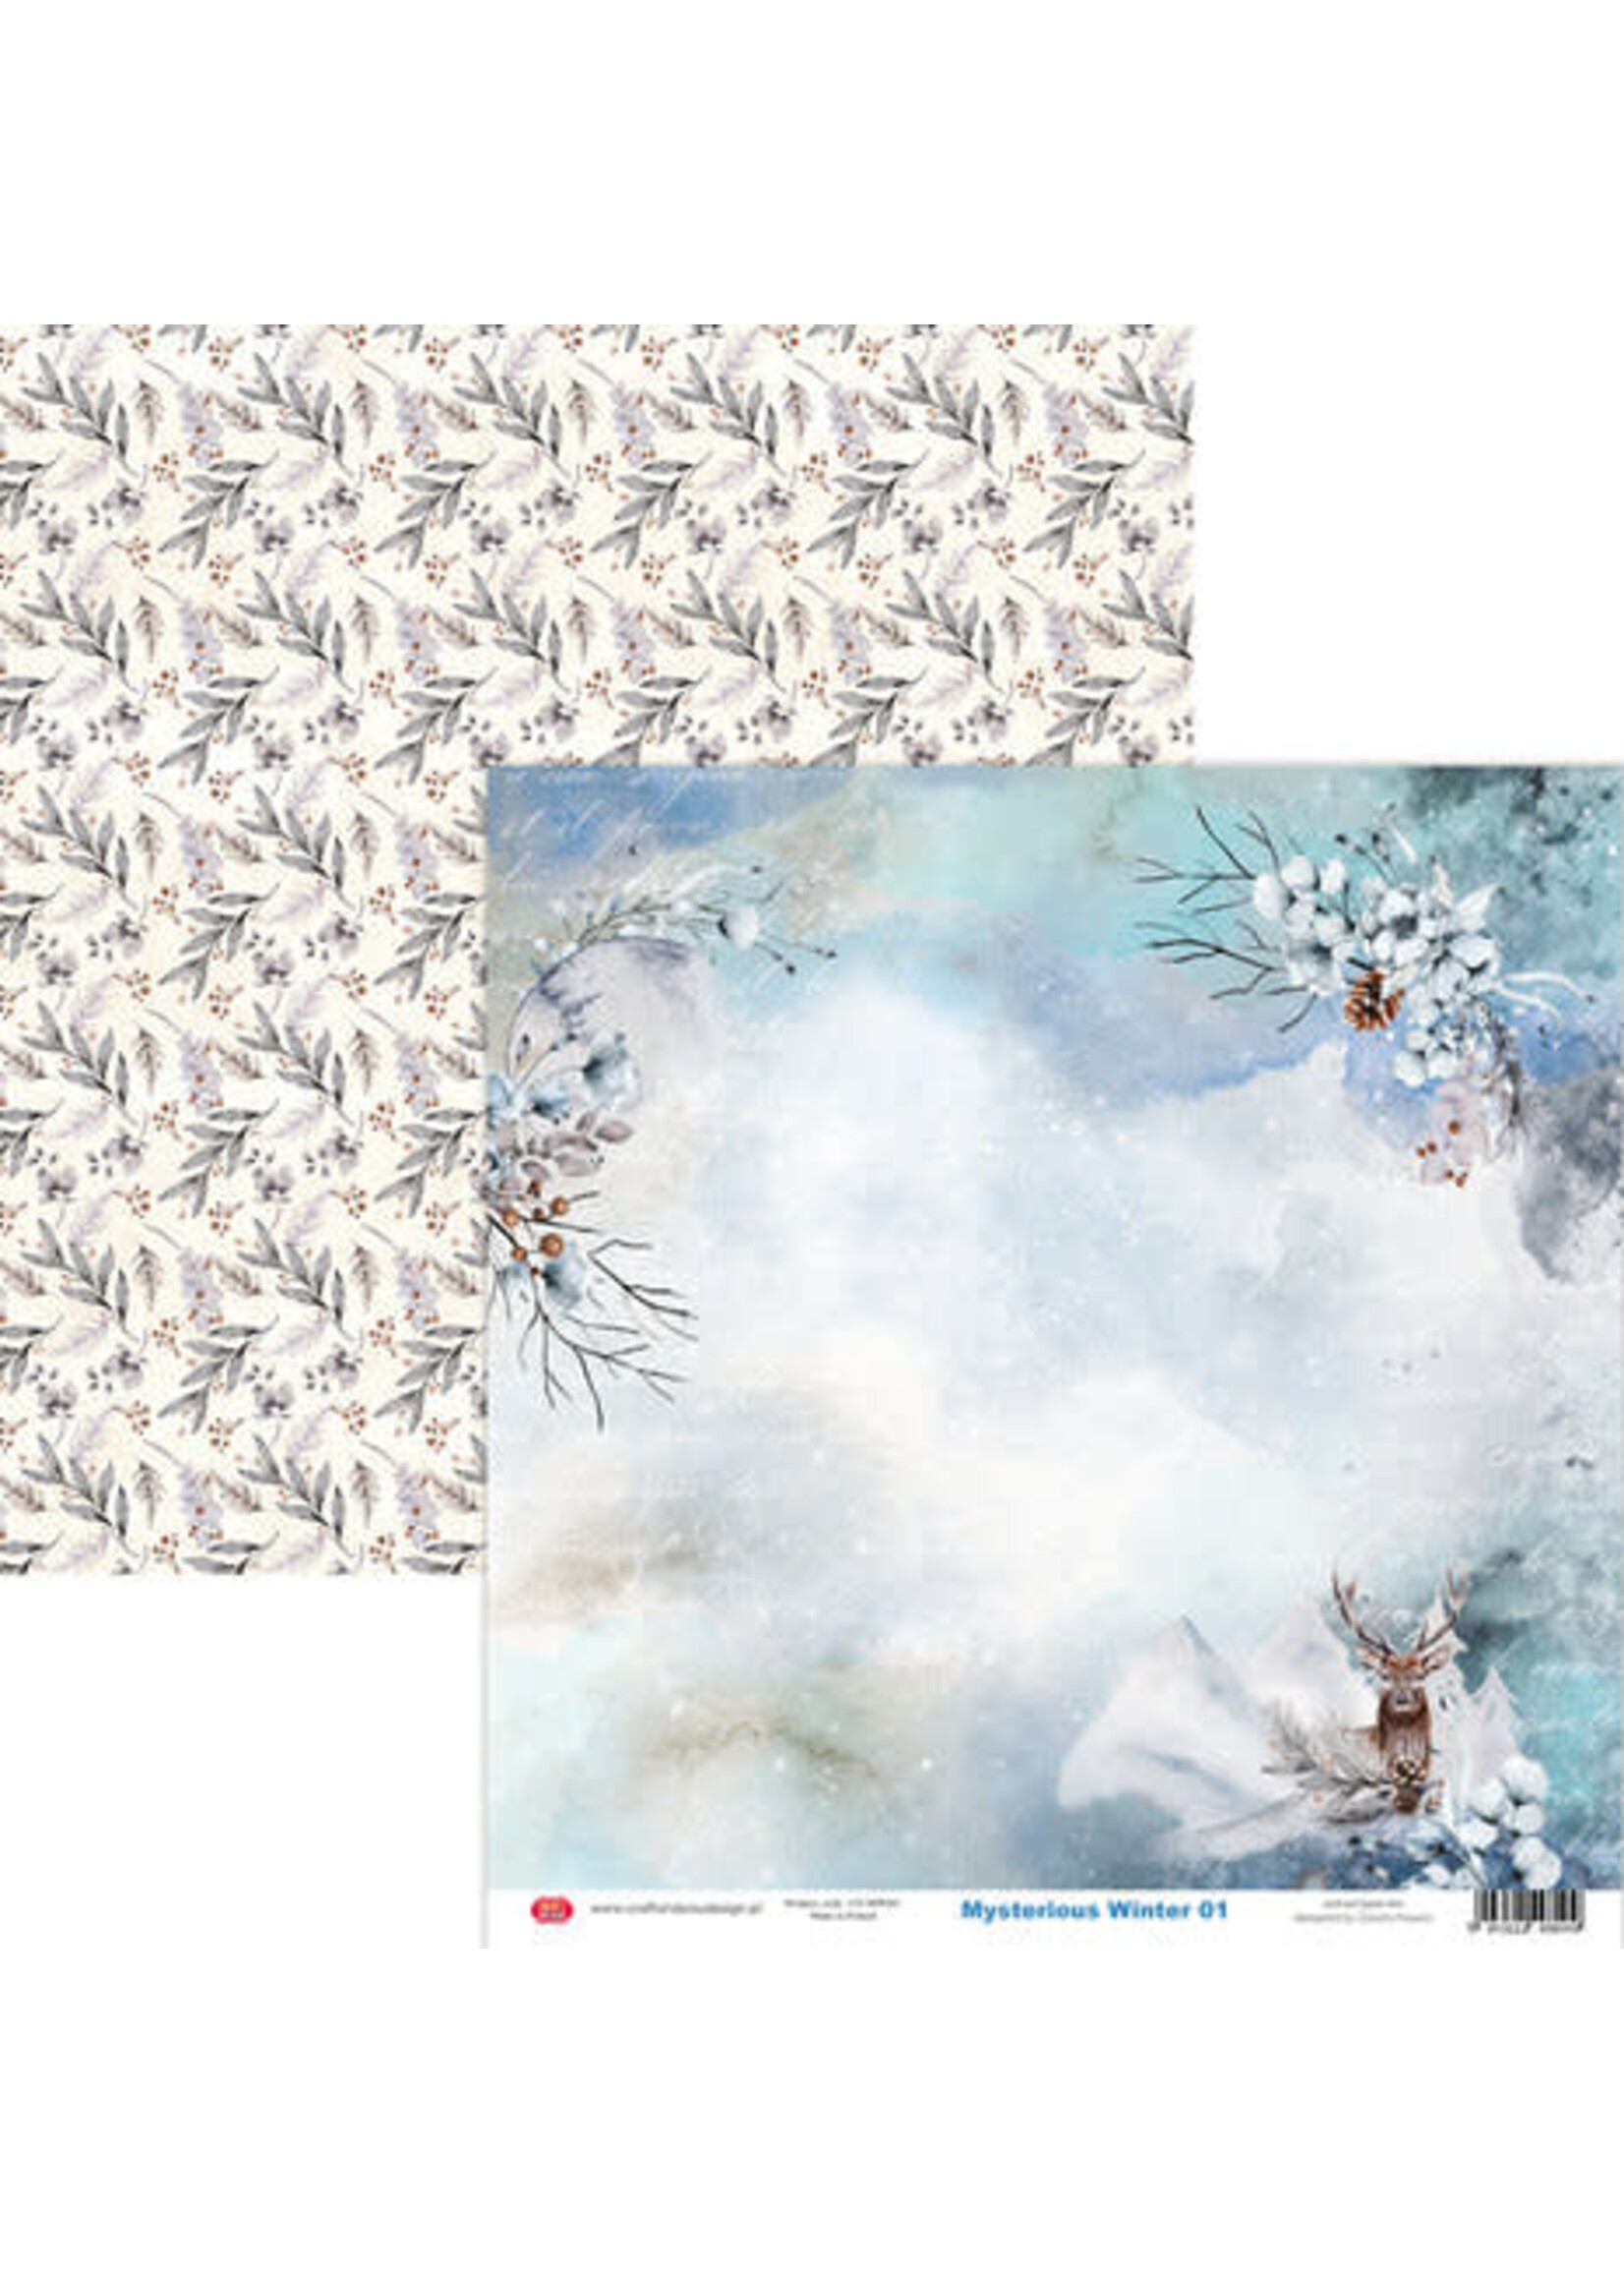 Craft and You Mysterious Winter 12x12 Inch Paper Set 250gsm (12sheets) (CYD-CPS-MWI30-12)